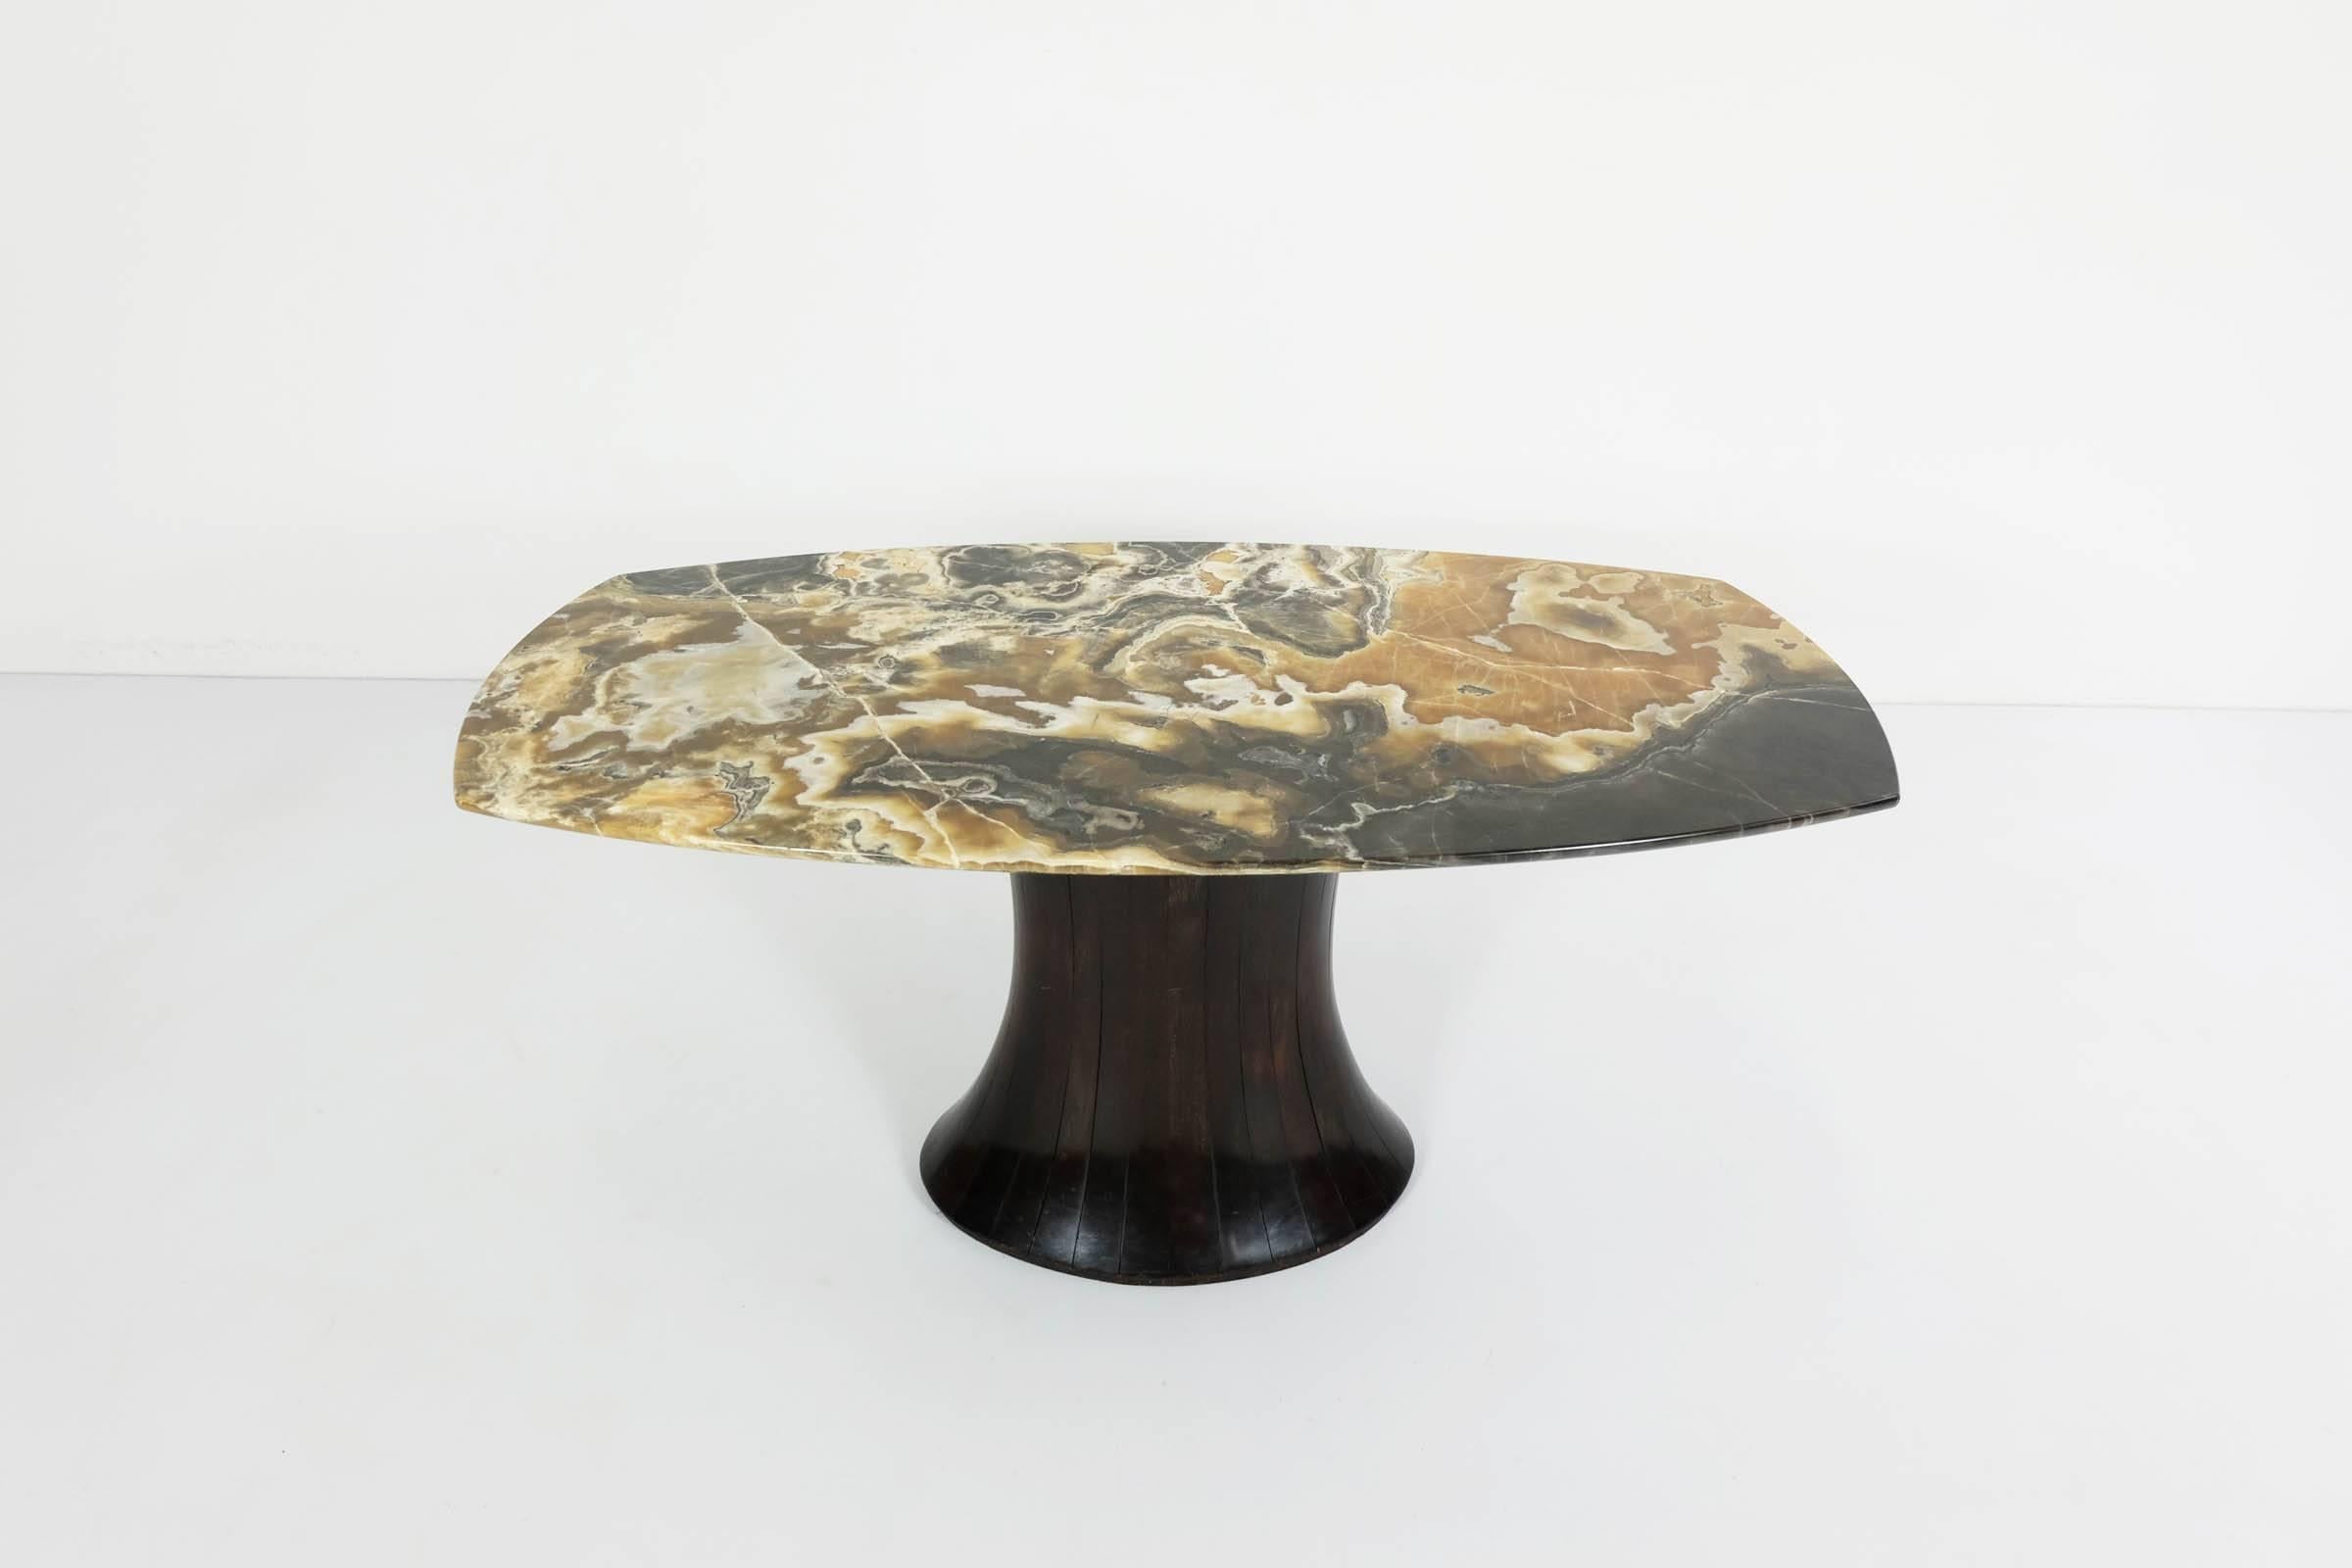 This is an incredible hi quality onyx and manufacture by Atelier Borsani designed by Osvaldo Borsani.
Manufactured during the late 1940s or earlier 1950s.